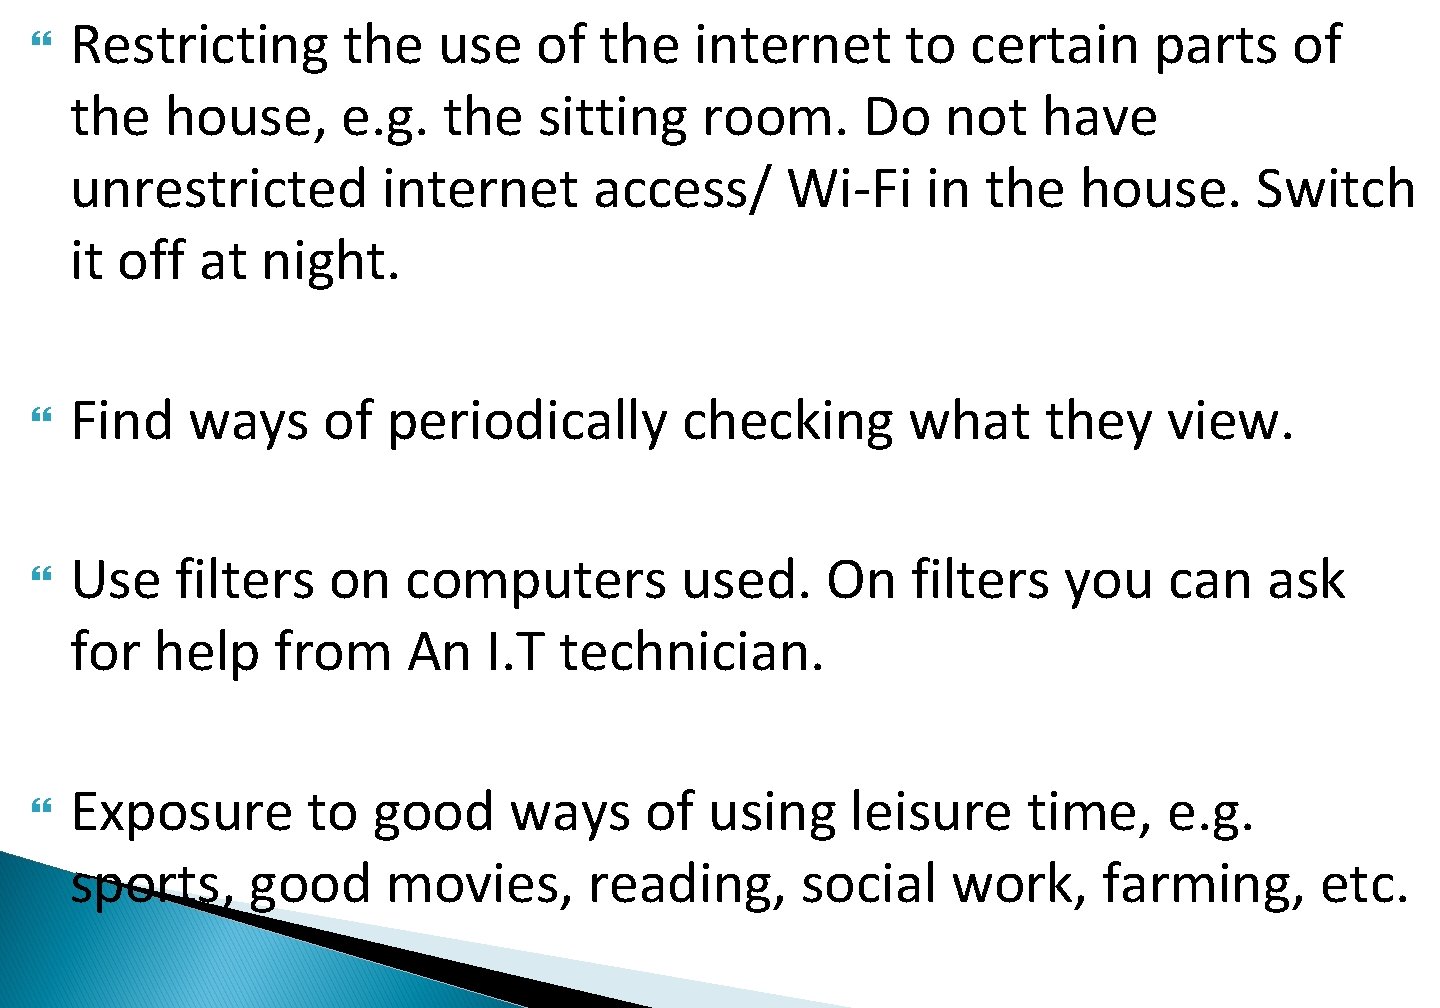  Restricting the use of the internet to certain parts of the house, e.